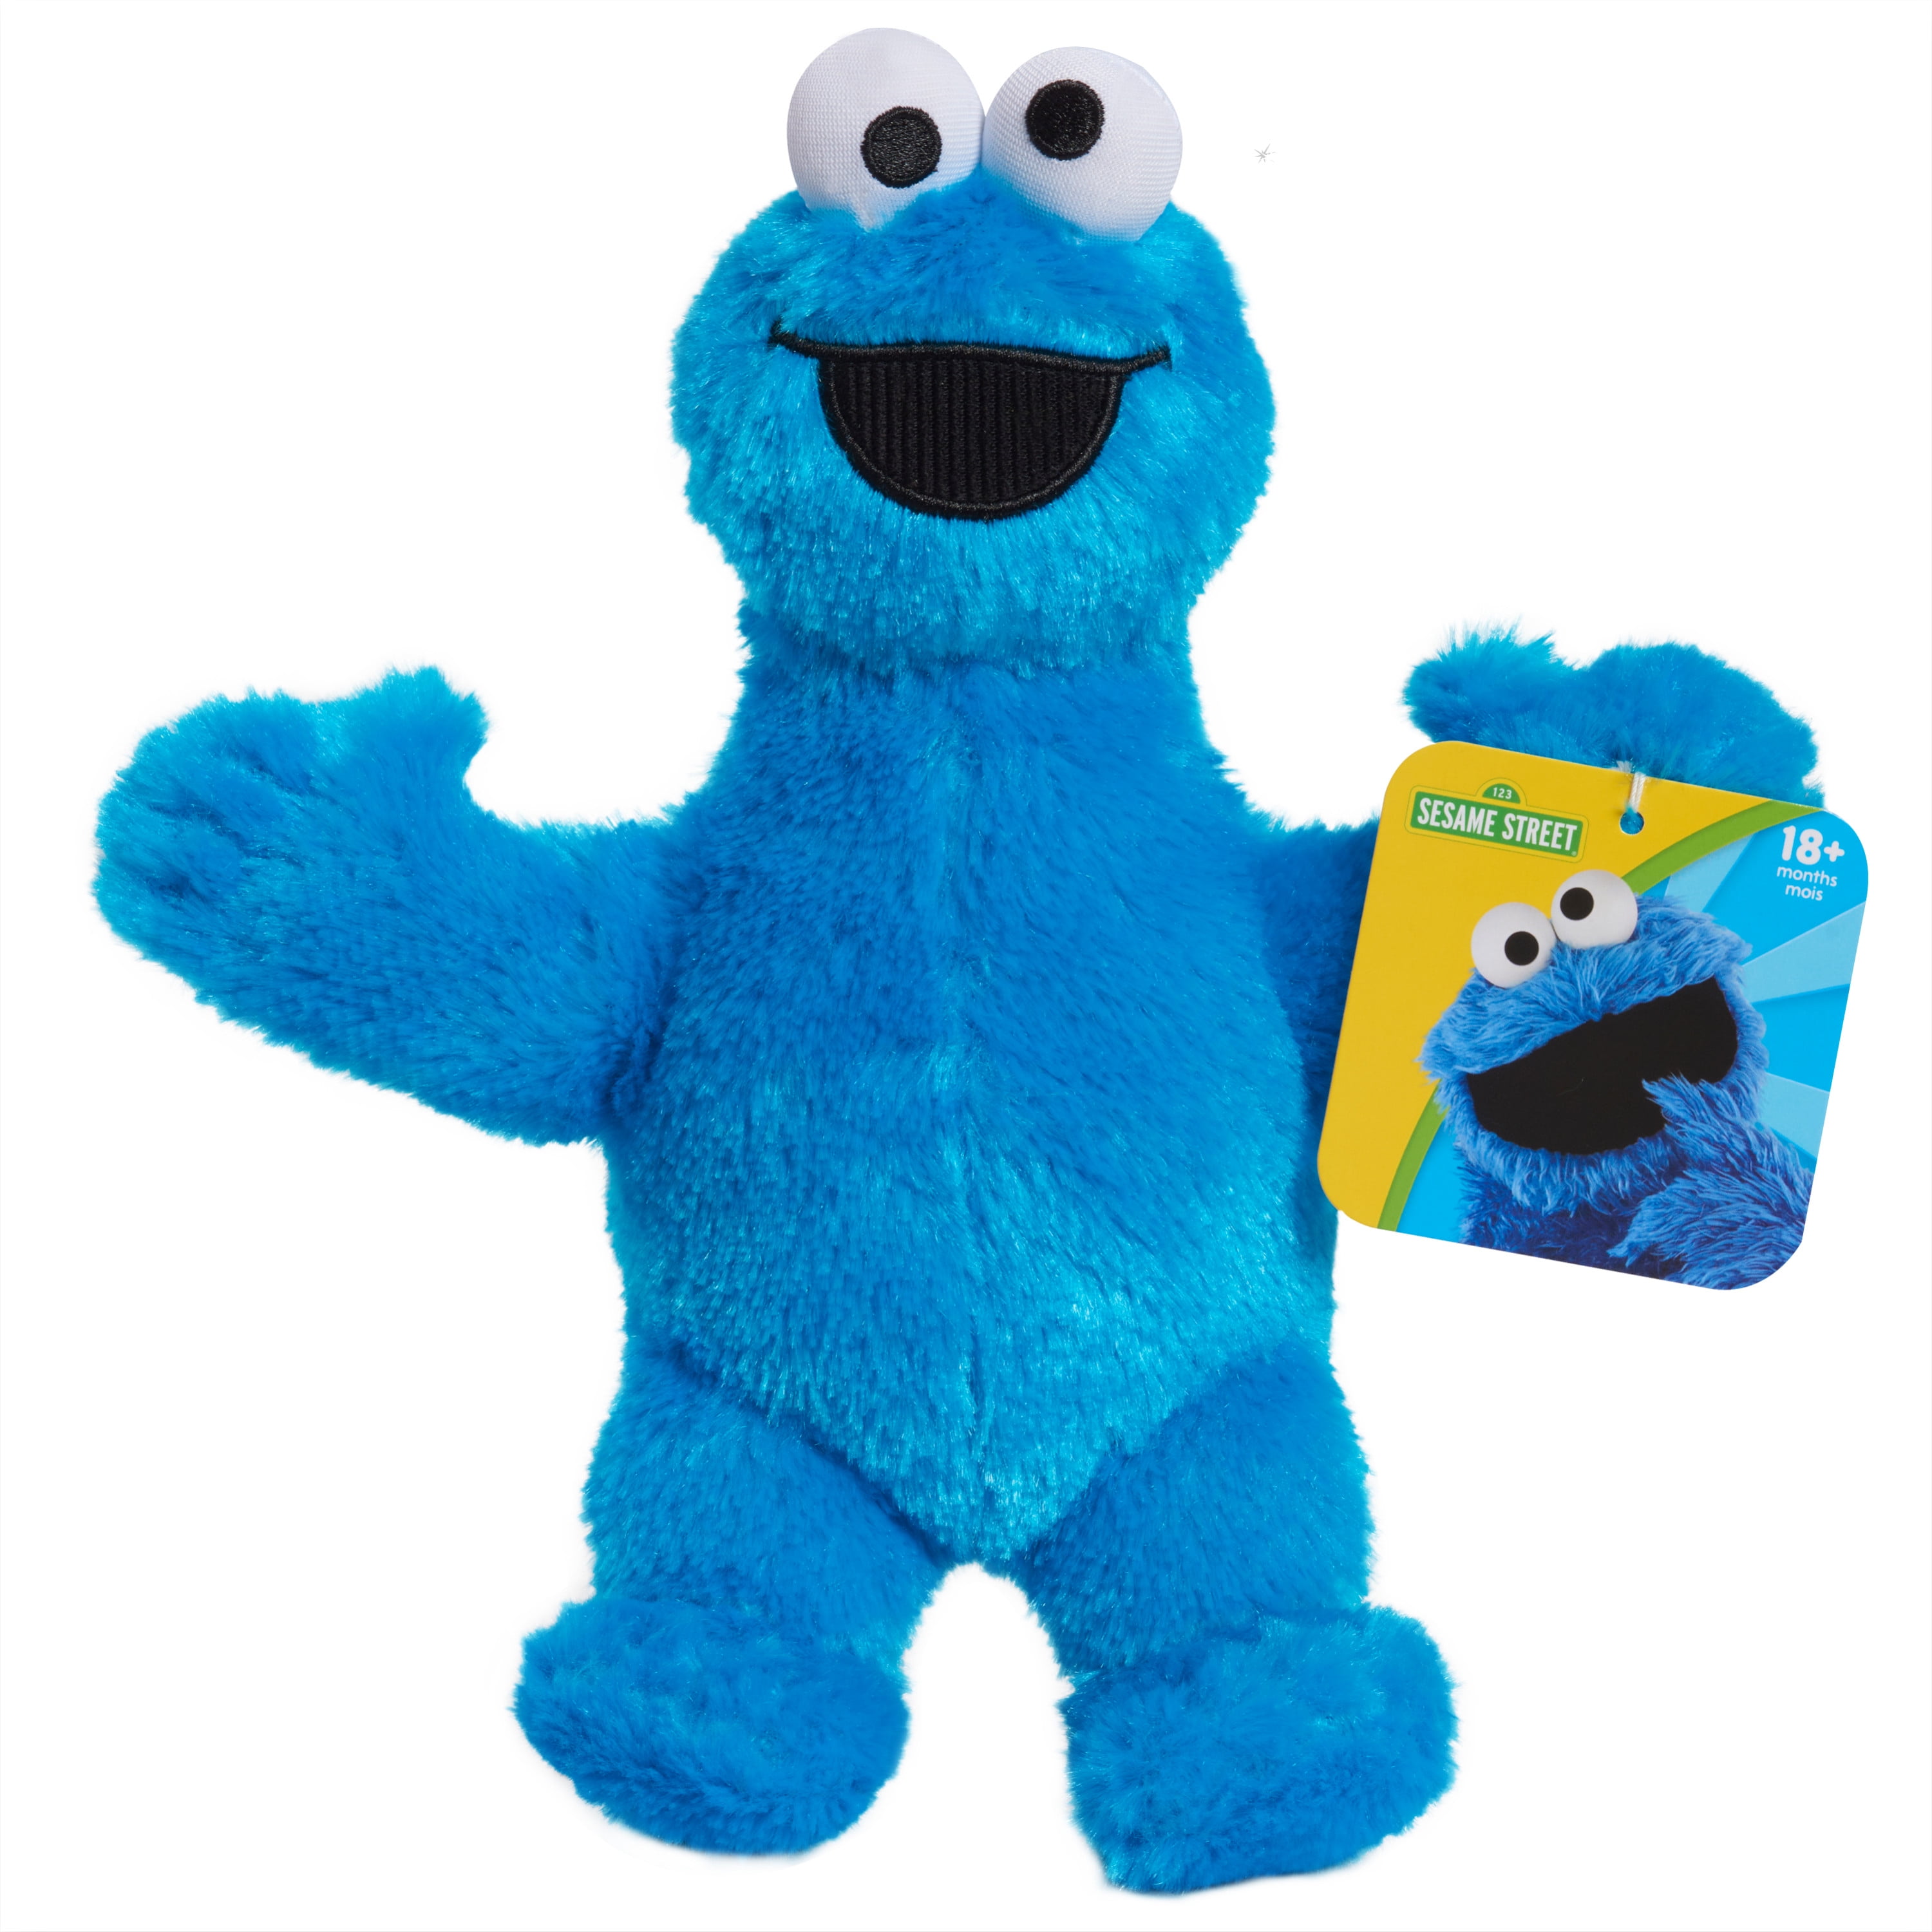 Sesame Street Friends 8-Inch Cookie Monster Sustainable Plush Stuffed Animal, Kids Toys for Ages 18 Month, Size: 8.5 inches; 3.5 inches; 9.25 Inches